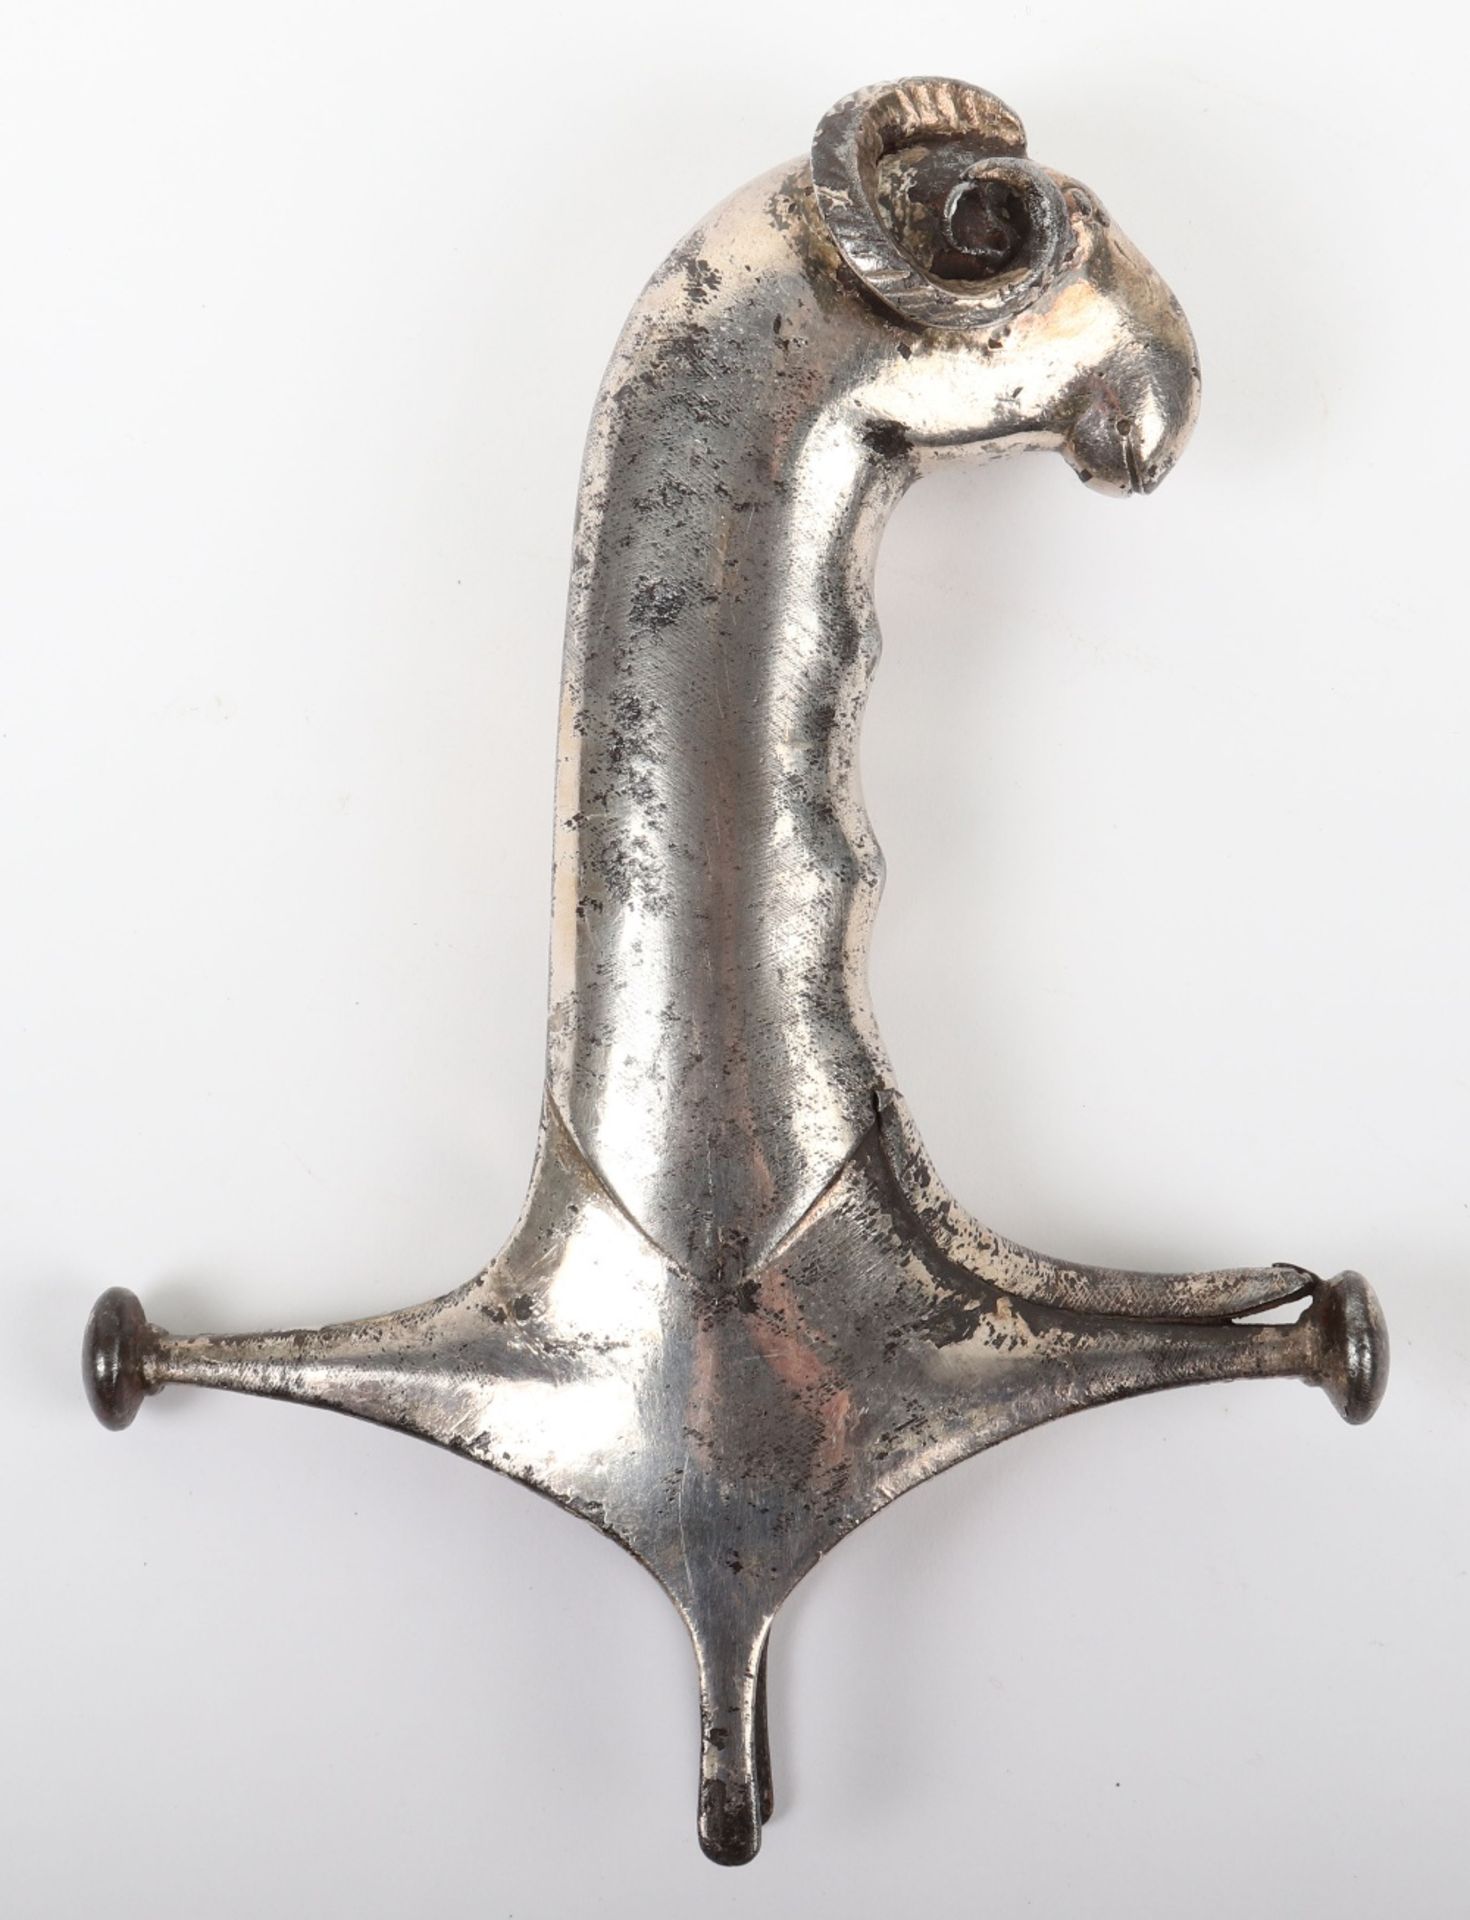 Large 18th or 19th Century Indian Iron Sword Hilt - Image 2 of 10